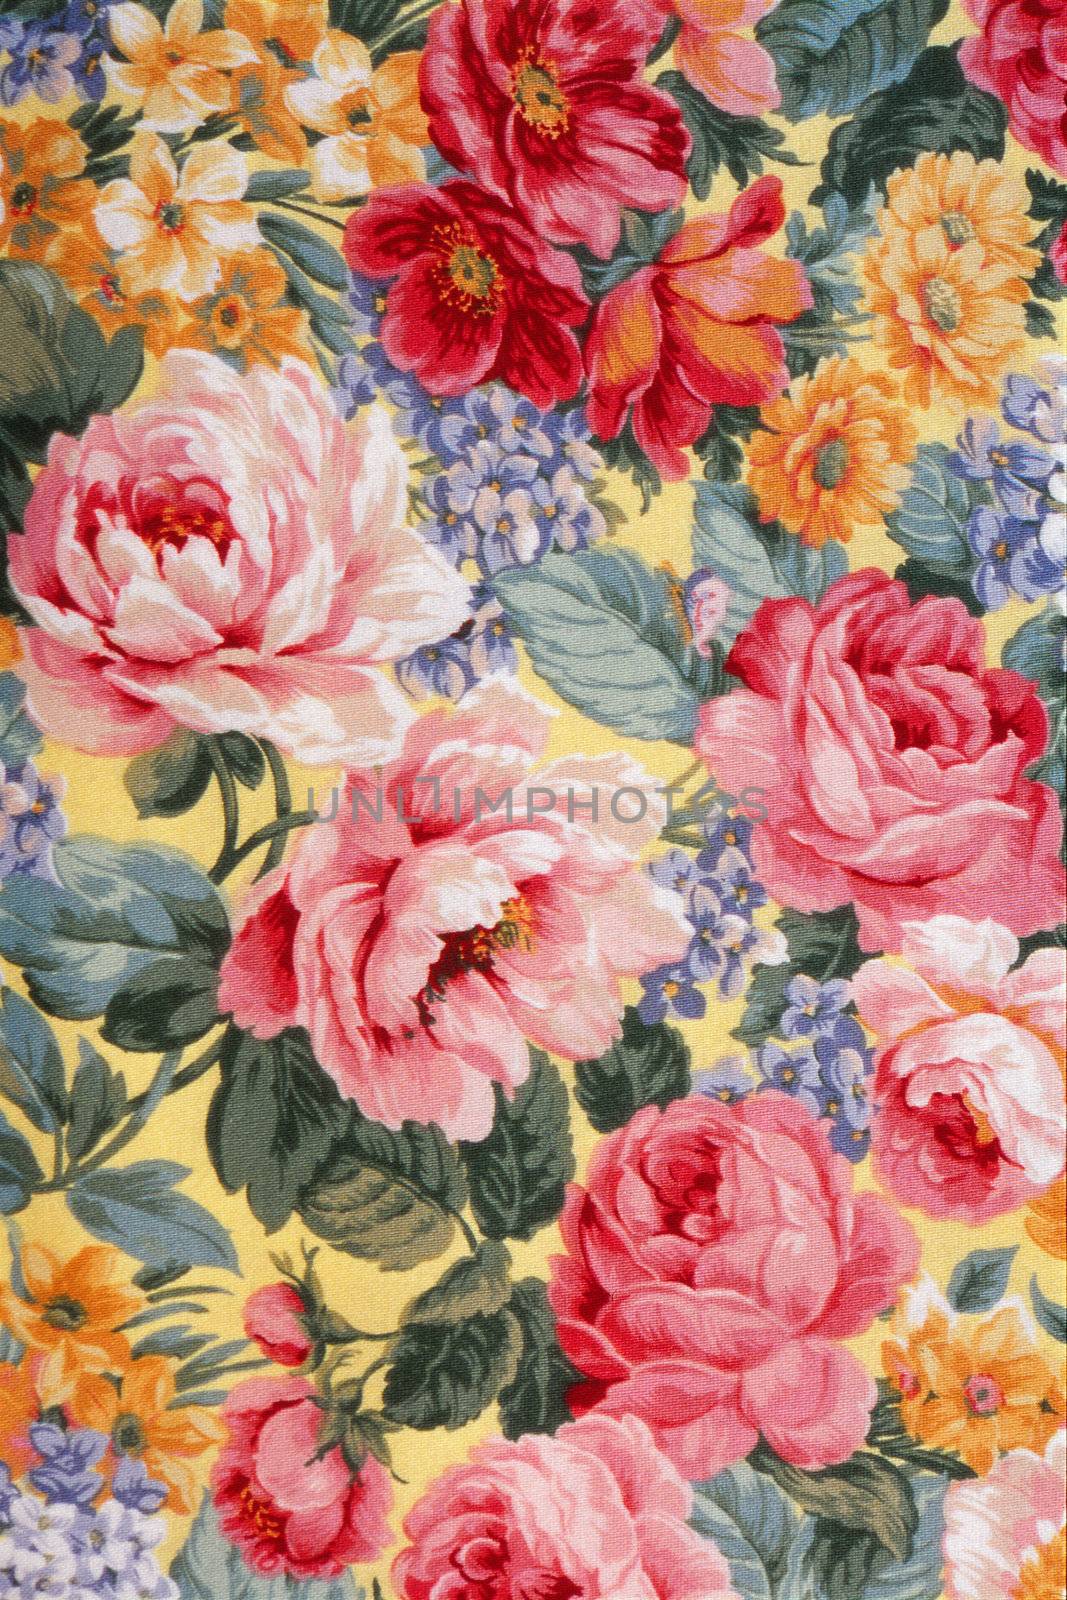 Shot of an antique floral fabric